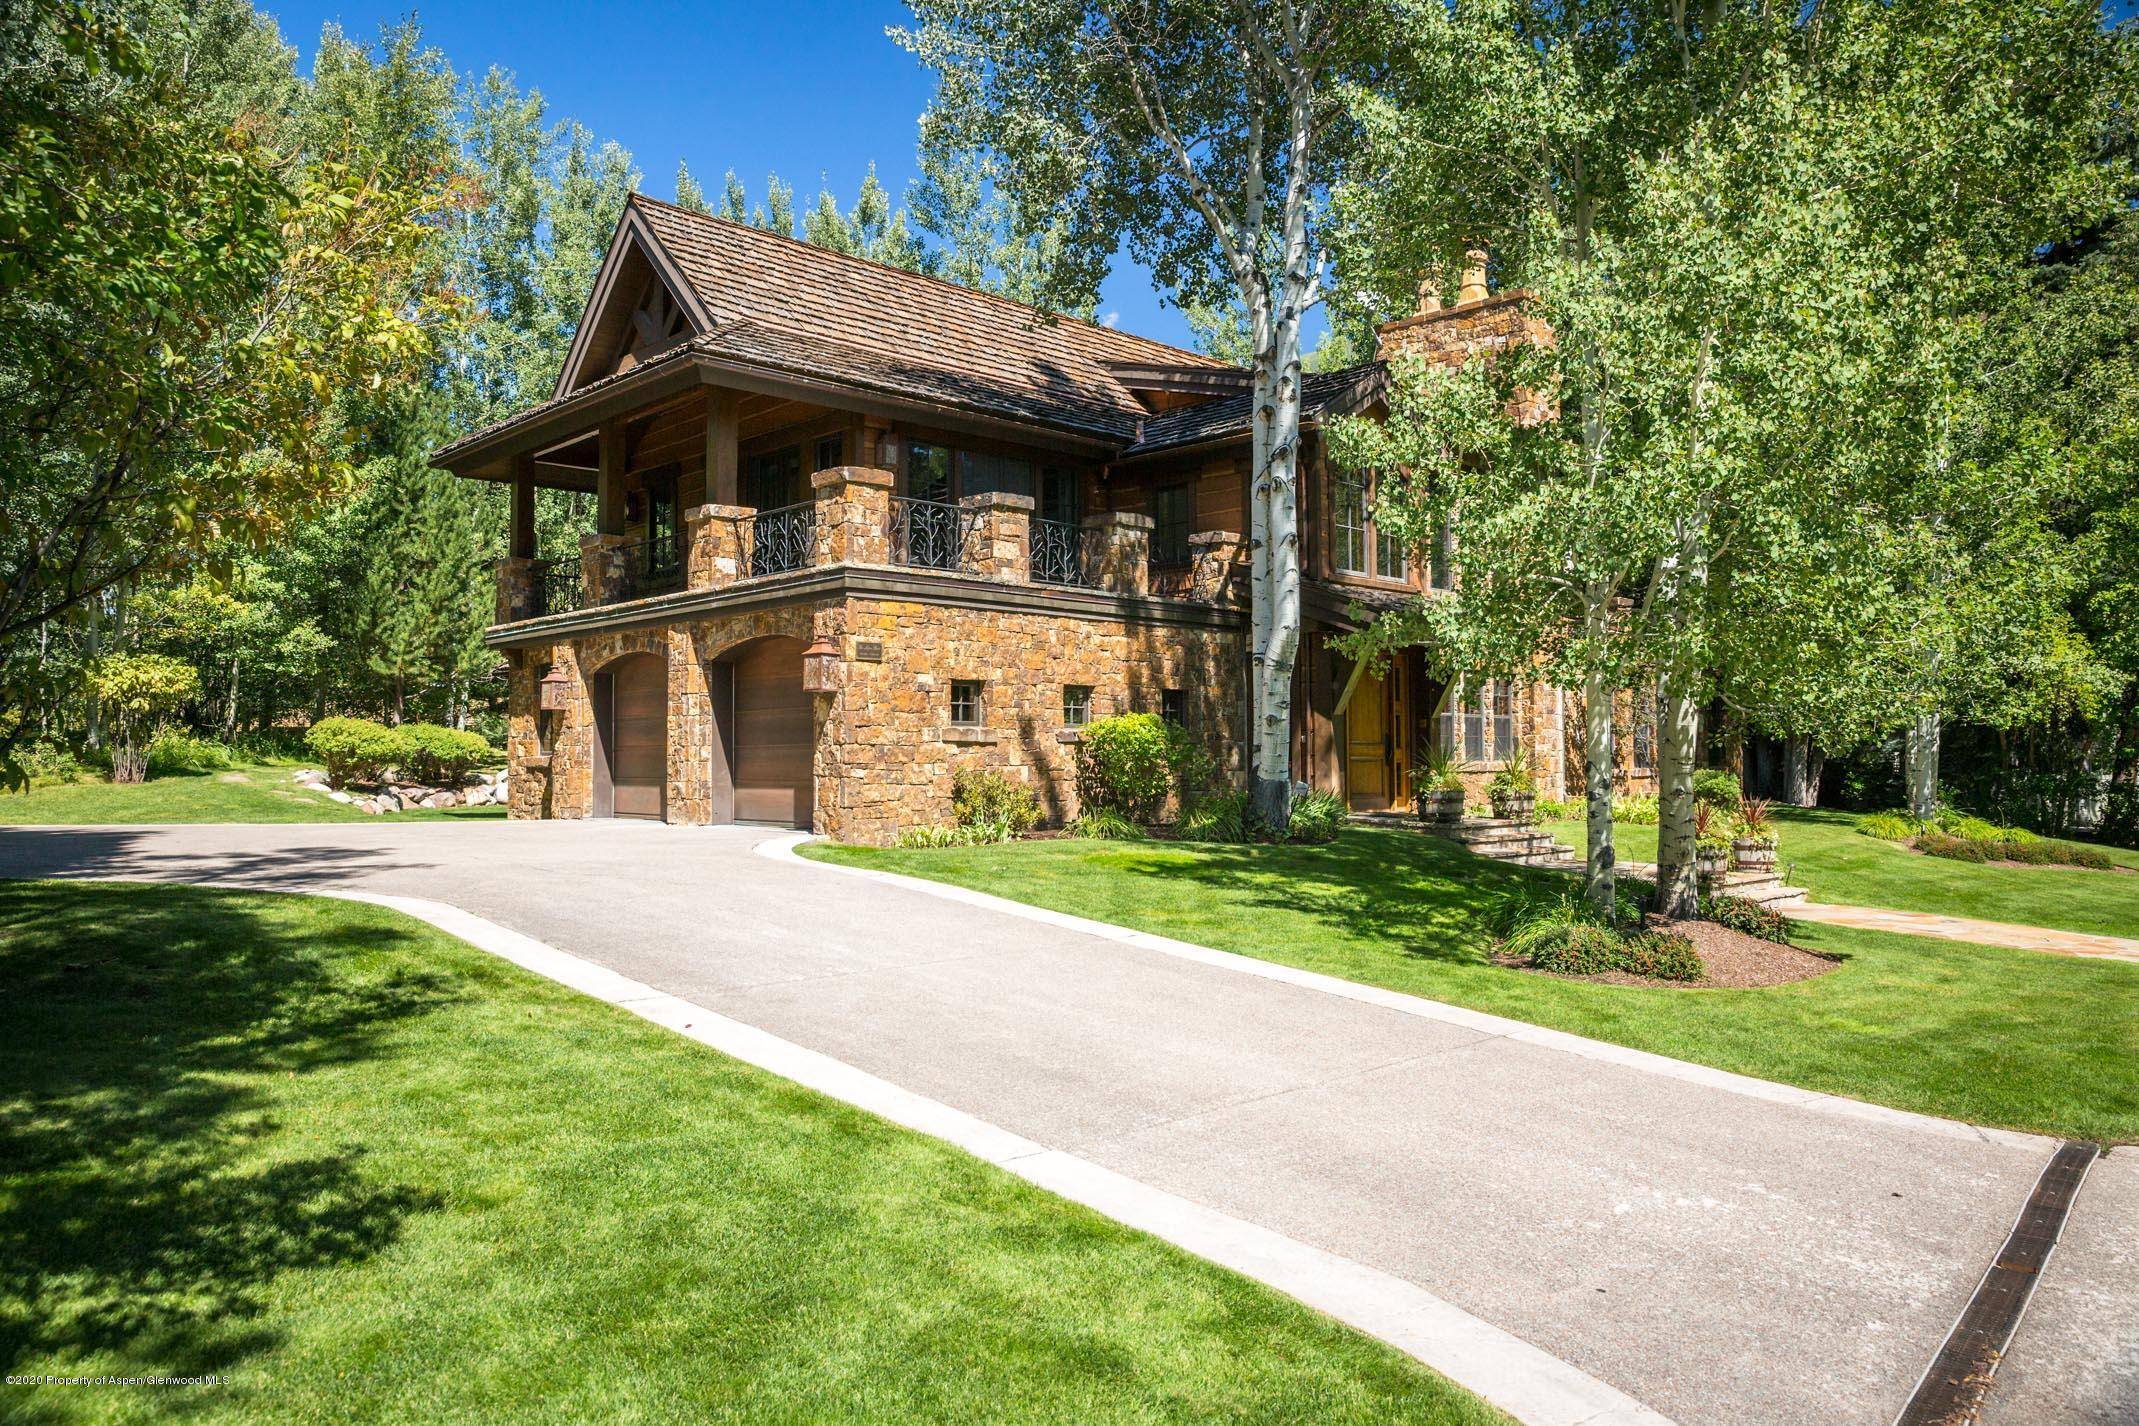 This stunning 5, 500 square foot, 5 bedroom home sits on a prime lot on the most prestigious street in Aspen's West End.